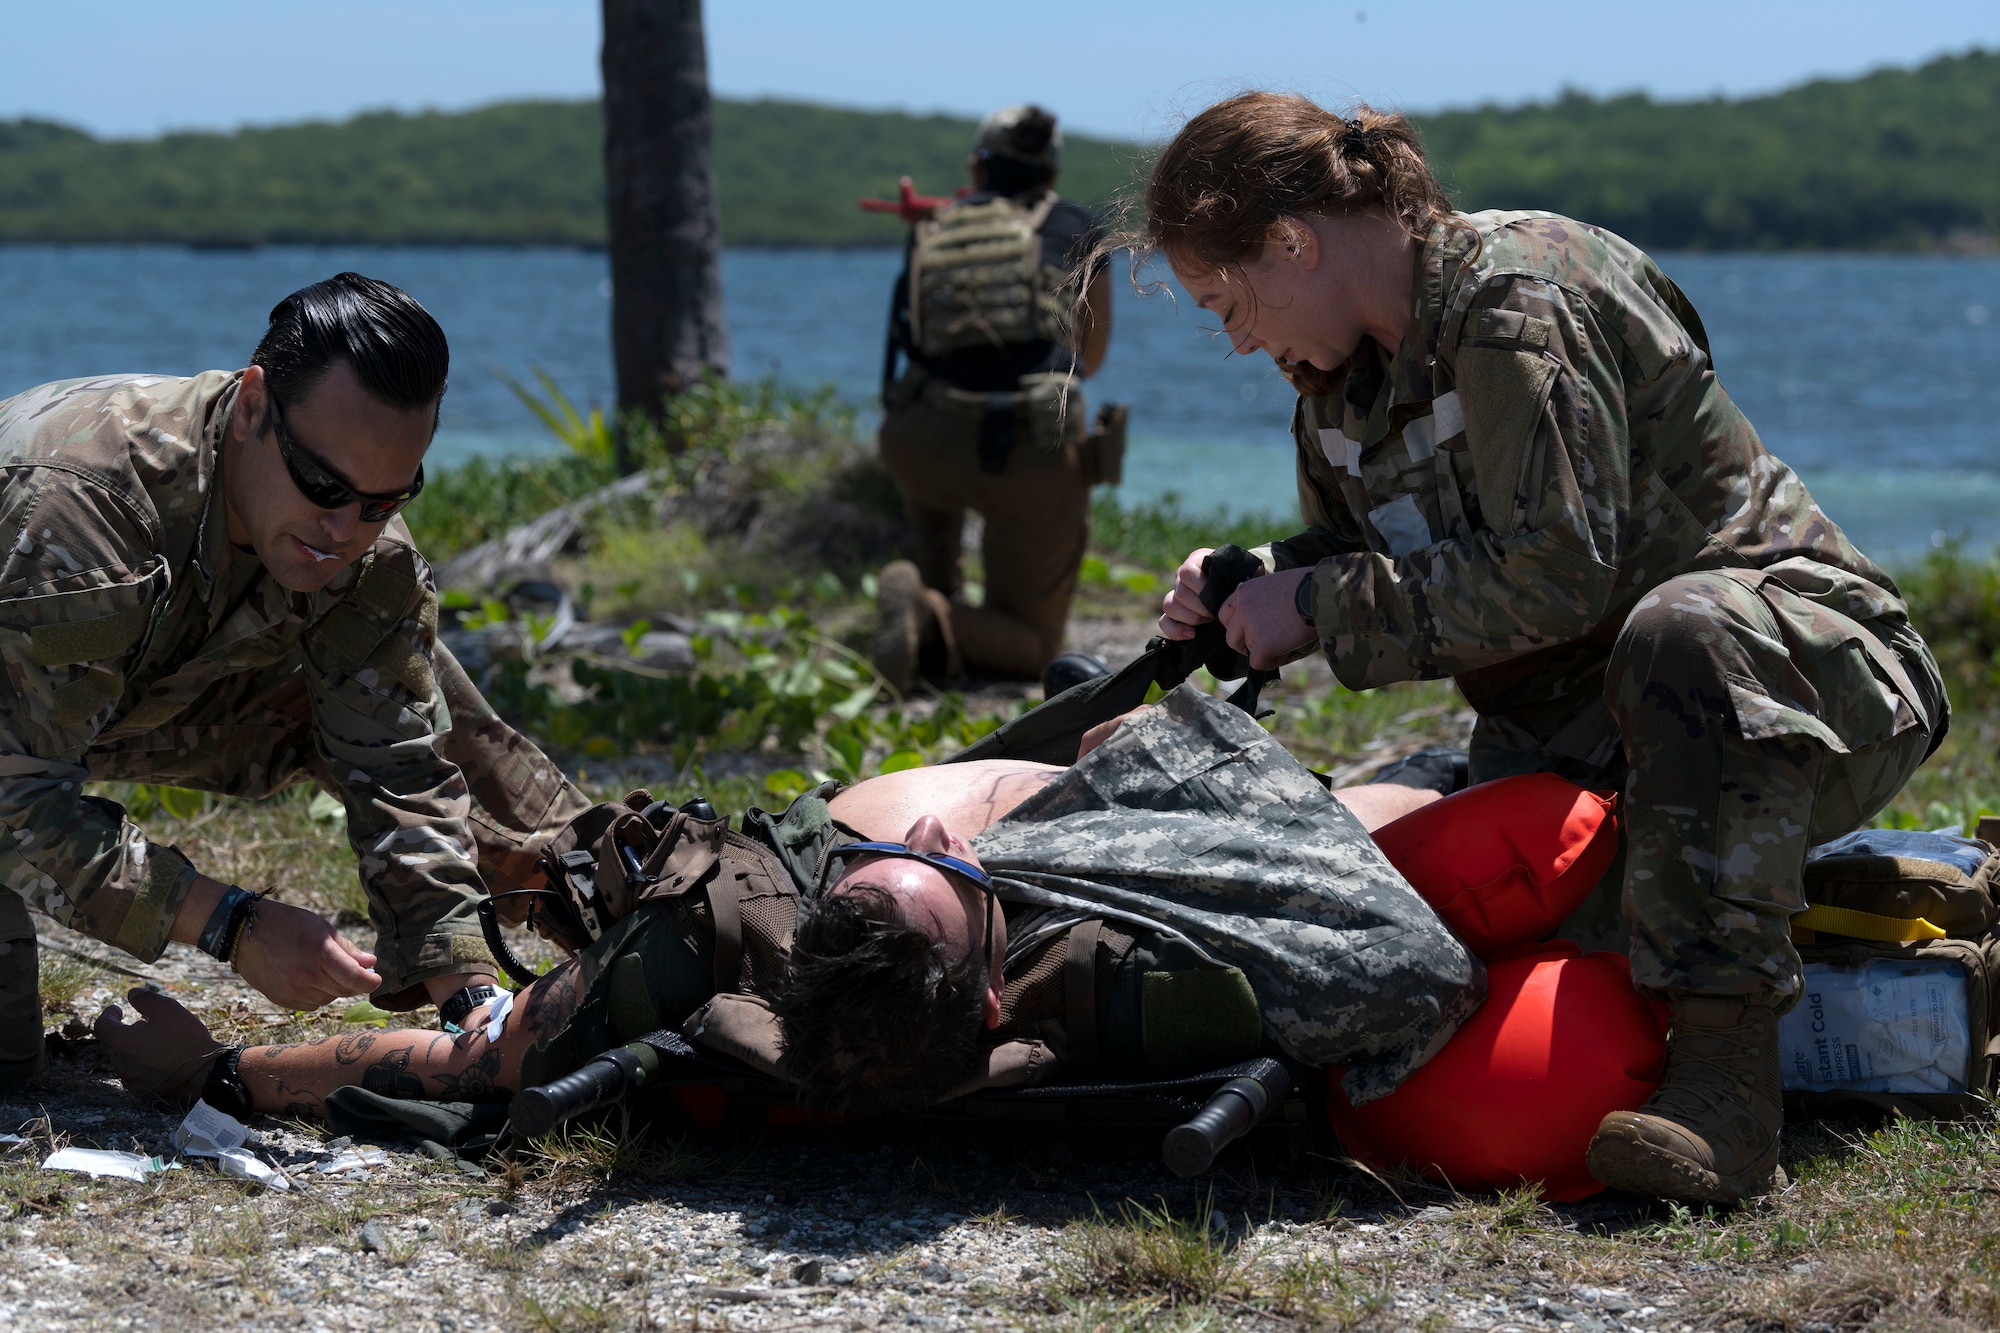 U.S. Air Force Senior Airman Ben Leveillee, a survival, evasion, resistance and escape specialist assigned to the 60th Operations Support Squadron, receives medical care during the Advisor Edge exercise at Roosevelt Roads, Ceiba, Puerto Rico, June 8, 2023. Advisor Edge was a multi-unit exercise with the integration of government agencies, where participant units tested air advising skills and strengthened partnerships through unique challenges, allowing burden sharing in combat with partner nations. (U.S. Air National Guard photo by Master Sgt. Rafael D. Rosa)